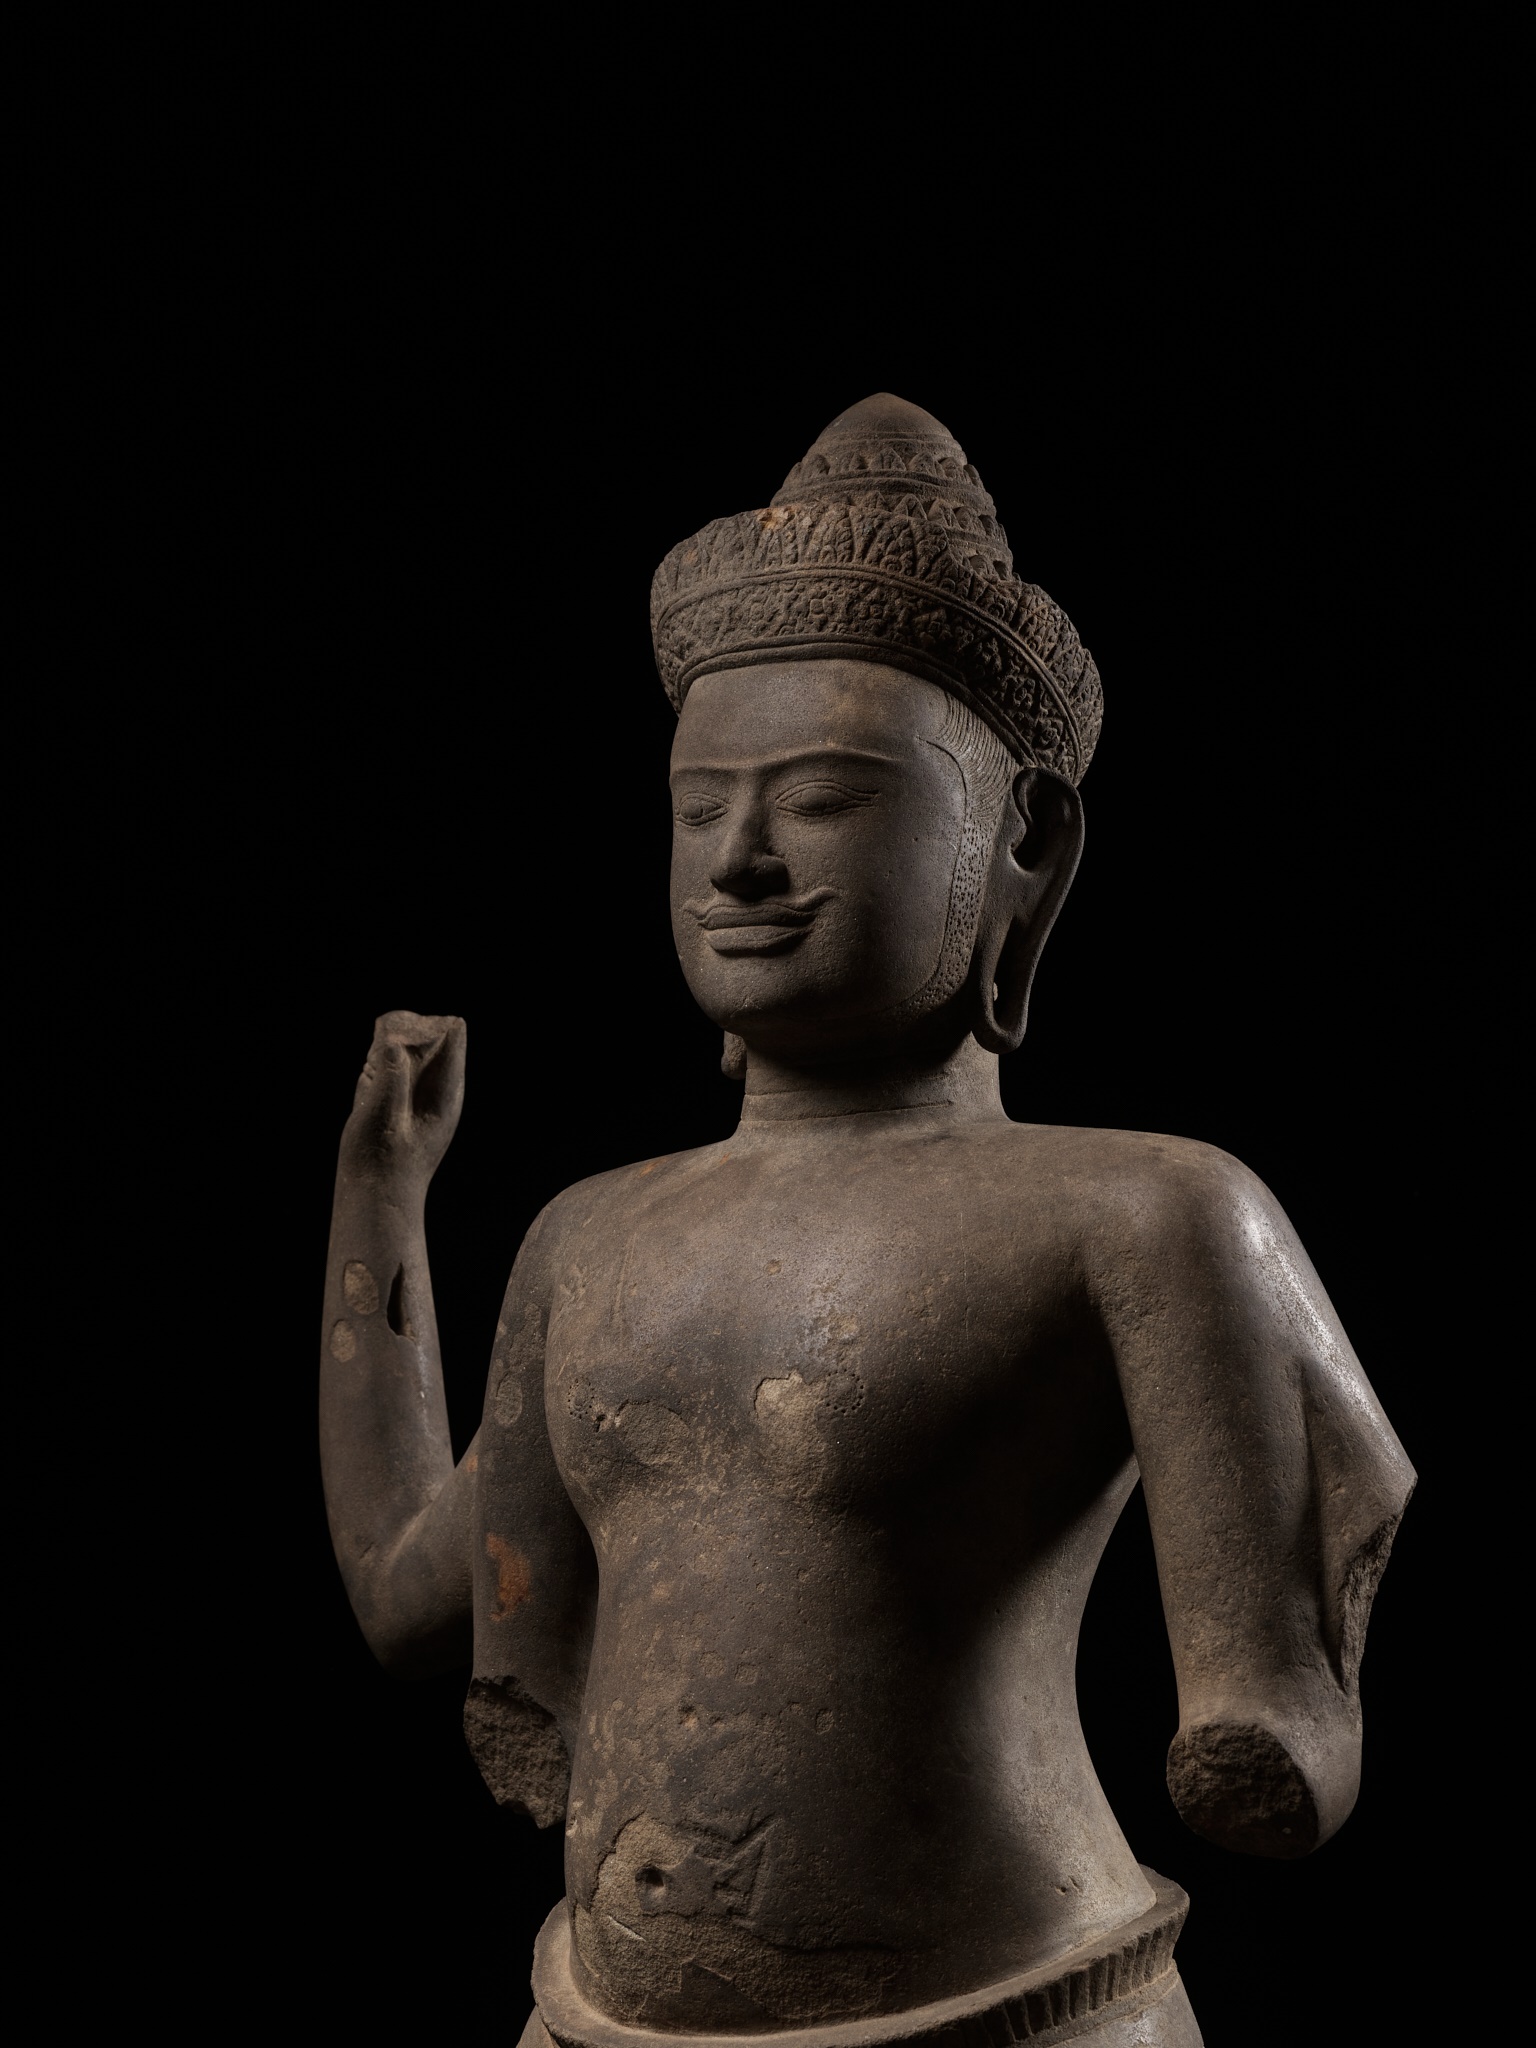 A KHMER SANDSTONE FIGURE OF A MALE DEITY, ANGKOR PERIOD - Image 6 of 13